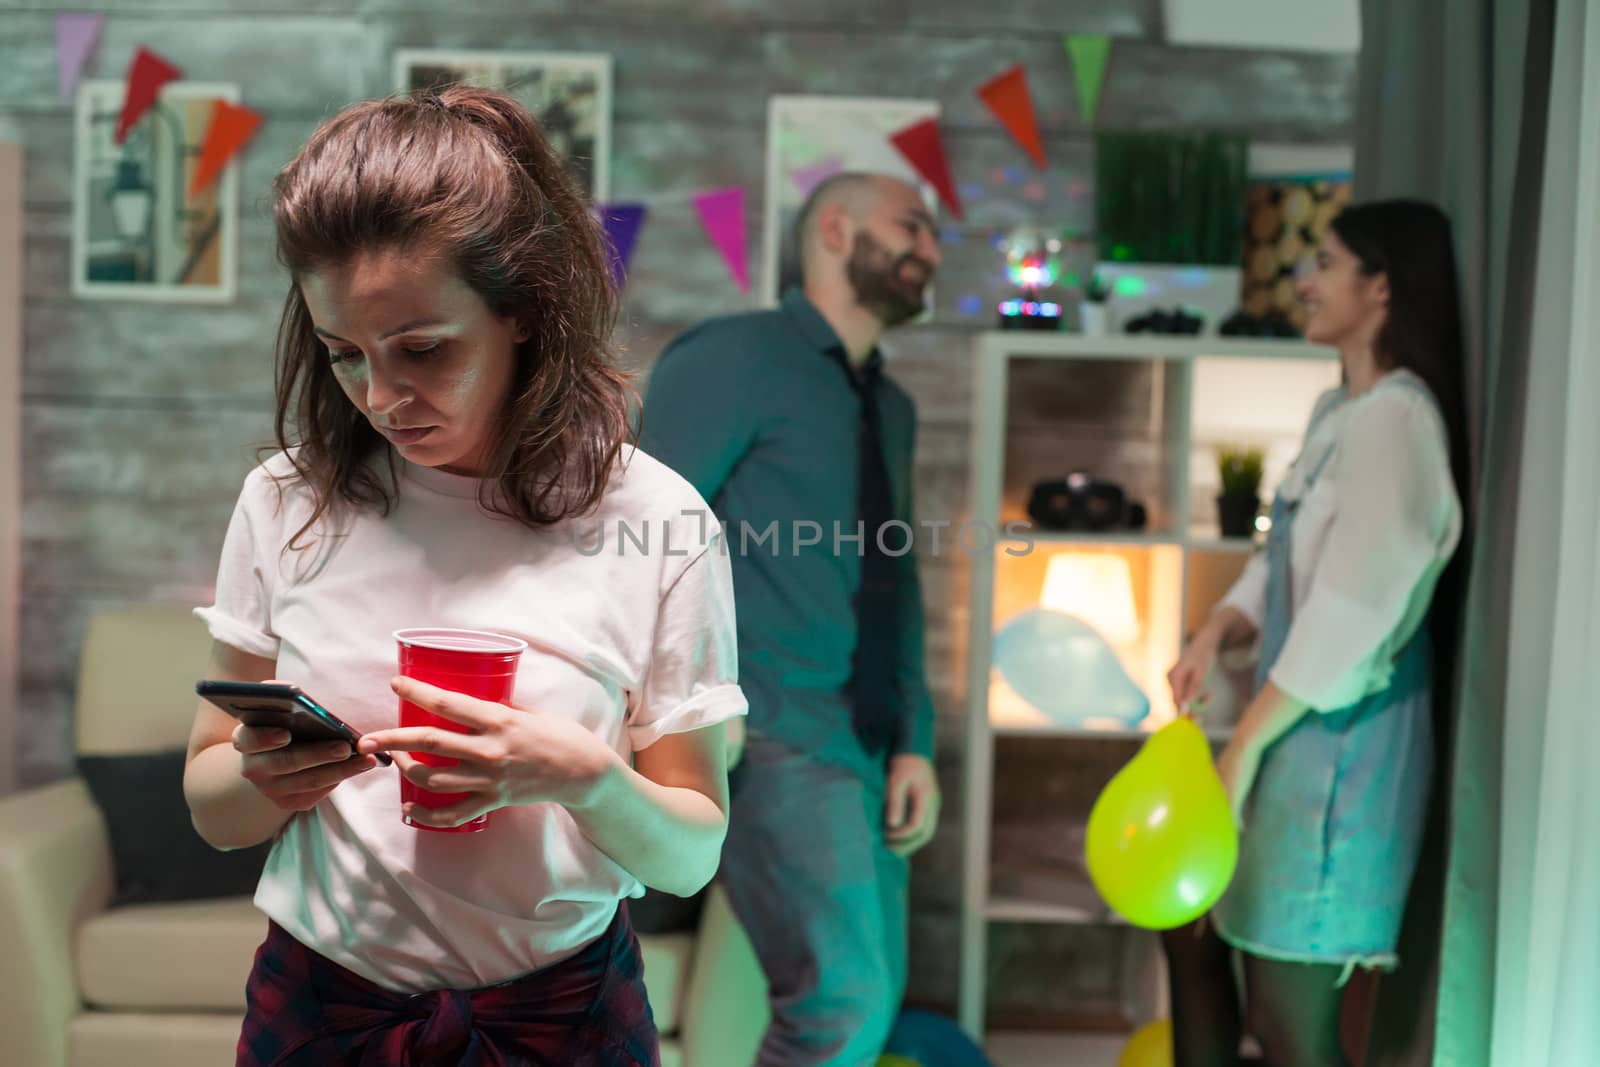 Young woman using her smartphone at a cheerful party. Man and woman talking in the background.